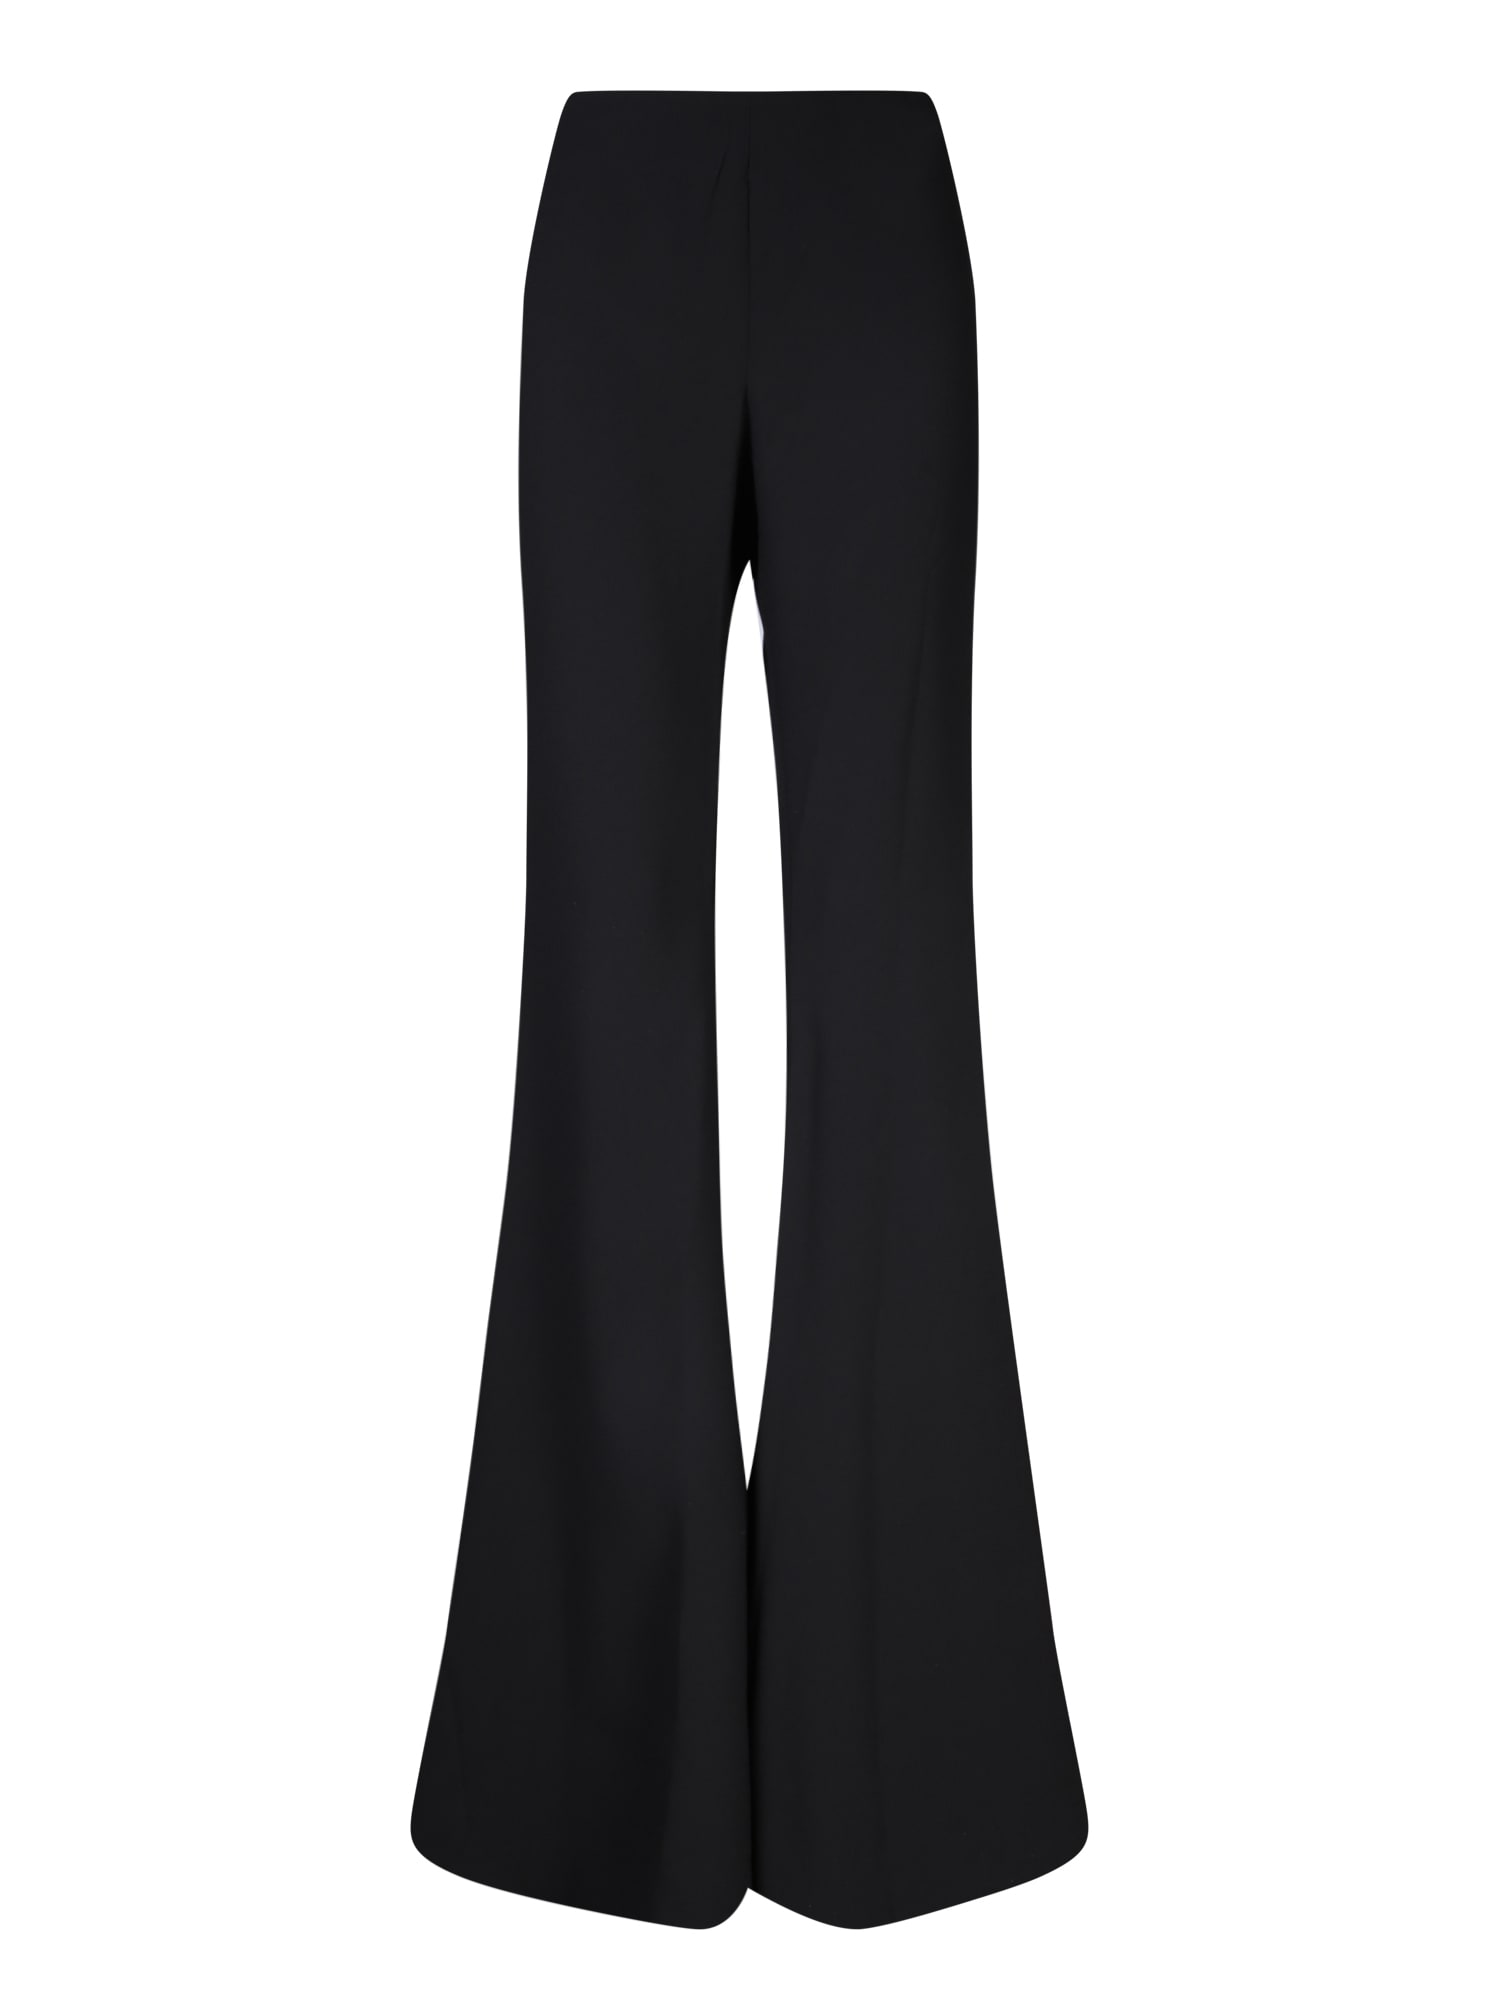 Black Crepe Flare Trousers